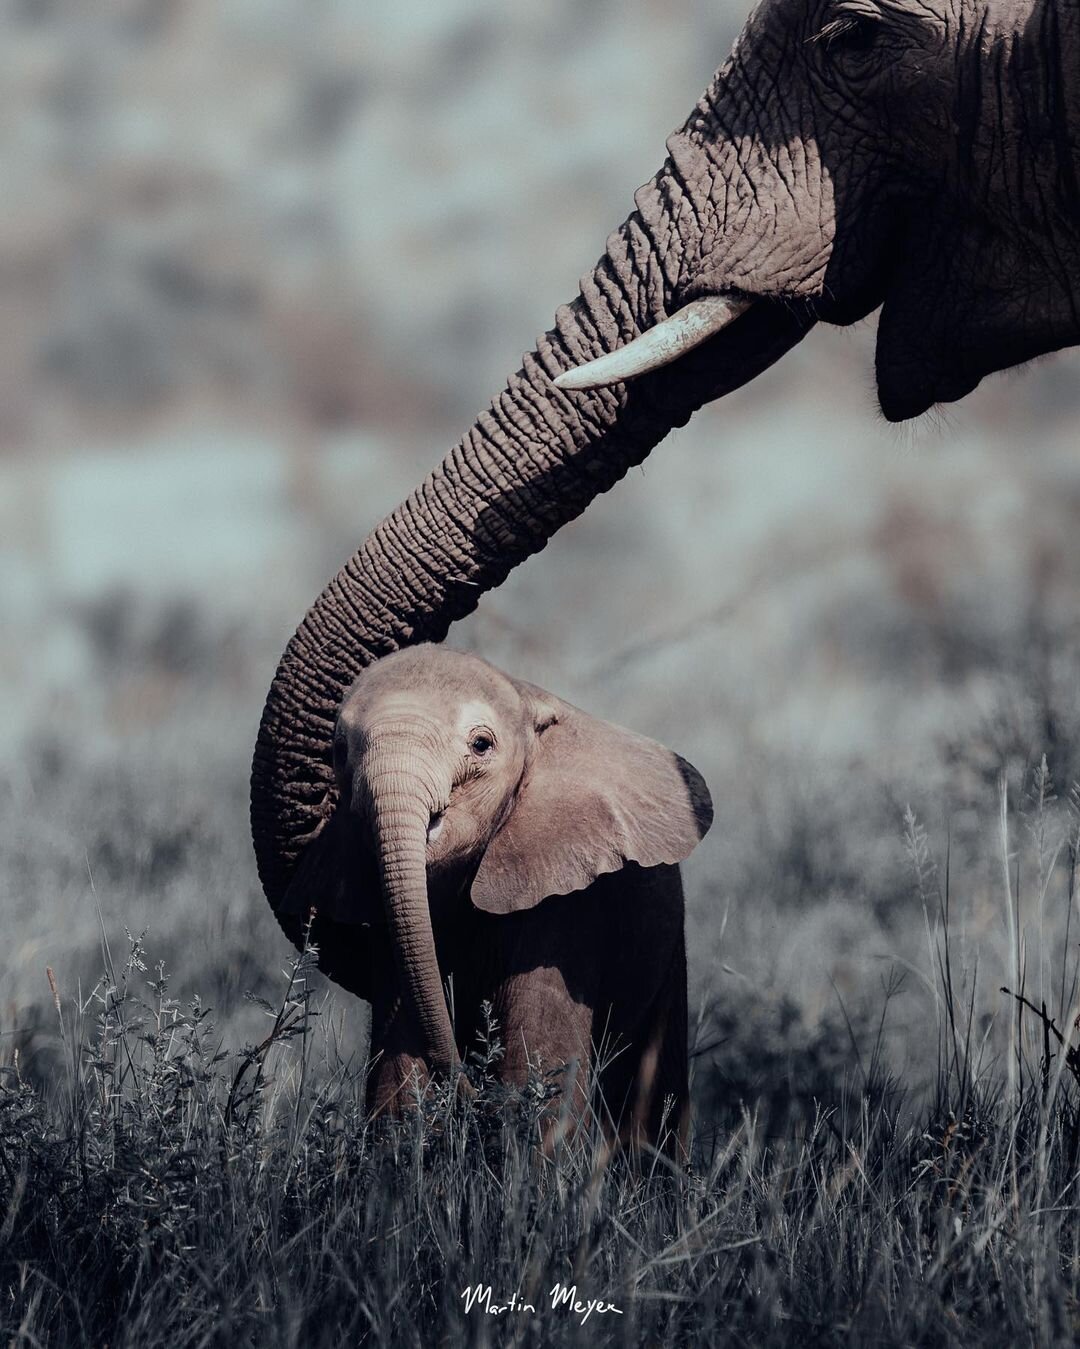 ELEPHANT CONNECTIONS — Wild Tomorrow Fund